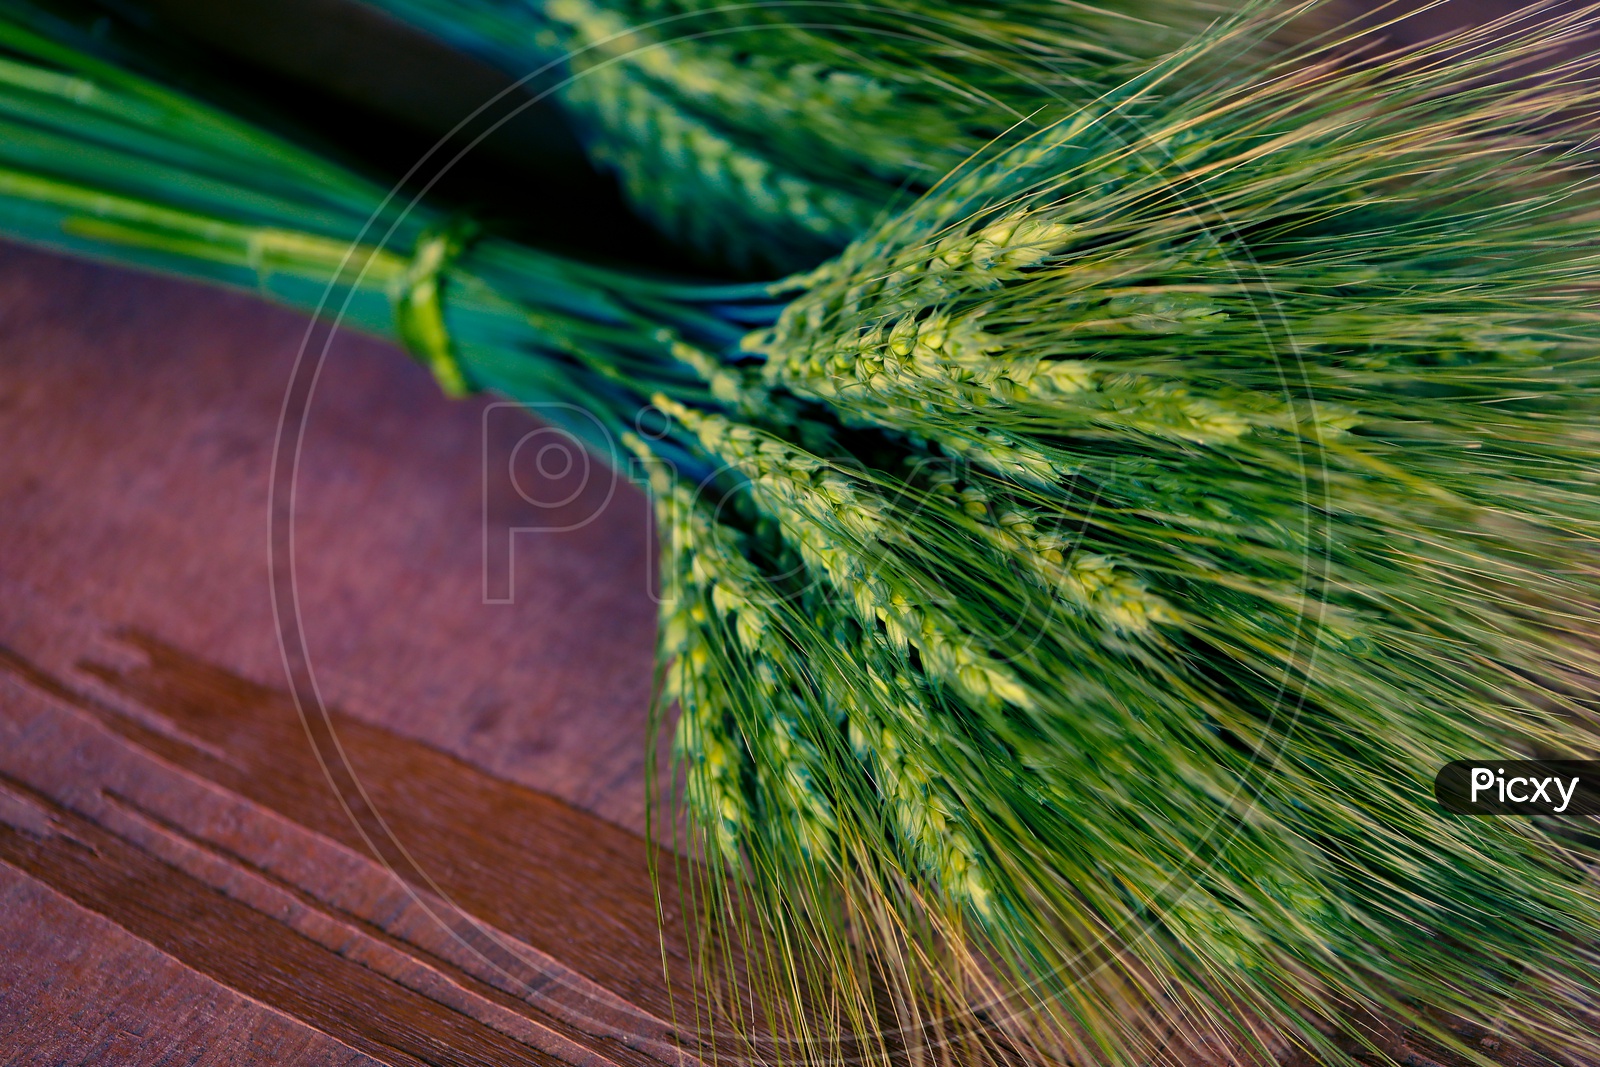 Young  Green  Wheat Ears Or Spikelets  Bunch  Closeup  On a Wooden Table Background